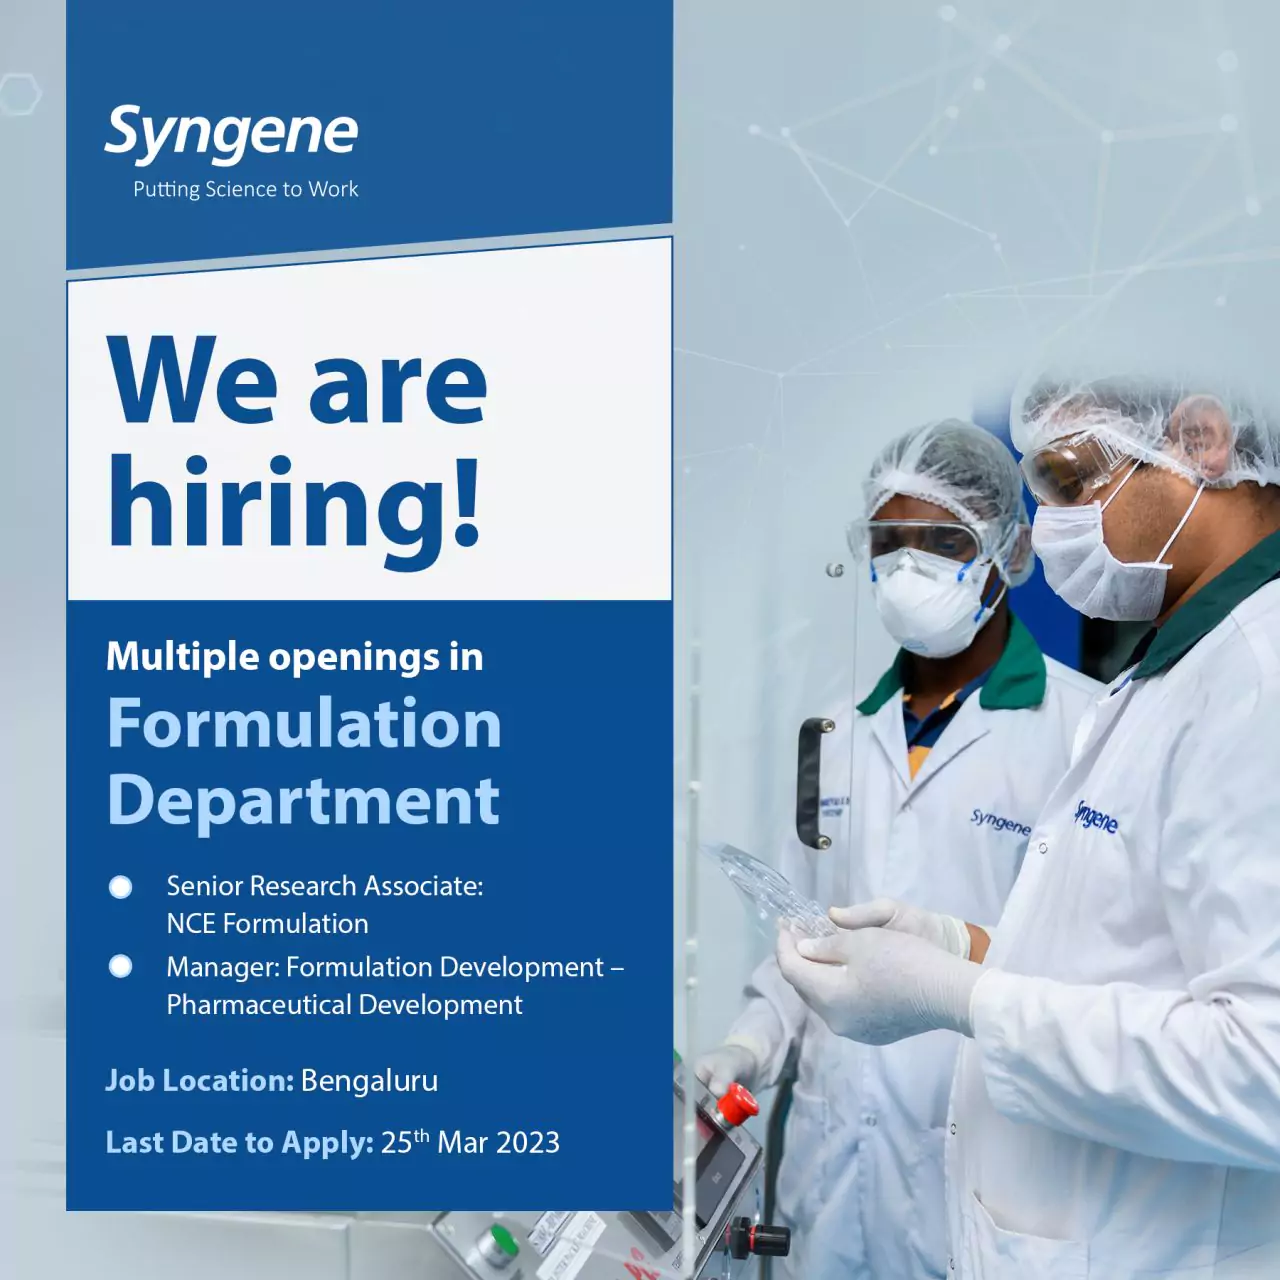 Job Openings at Syngene: Senior Research Associate and Manager Positions in NCE